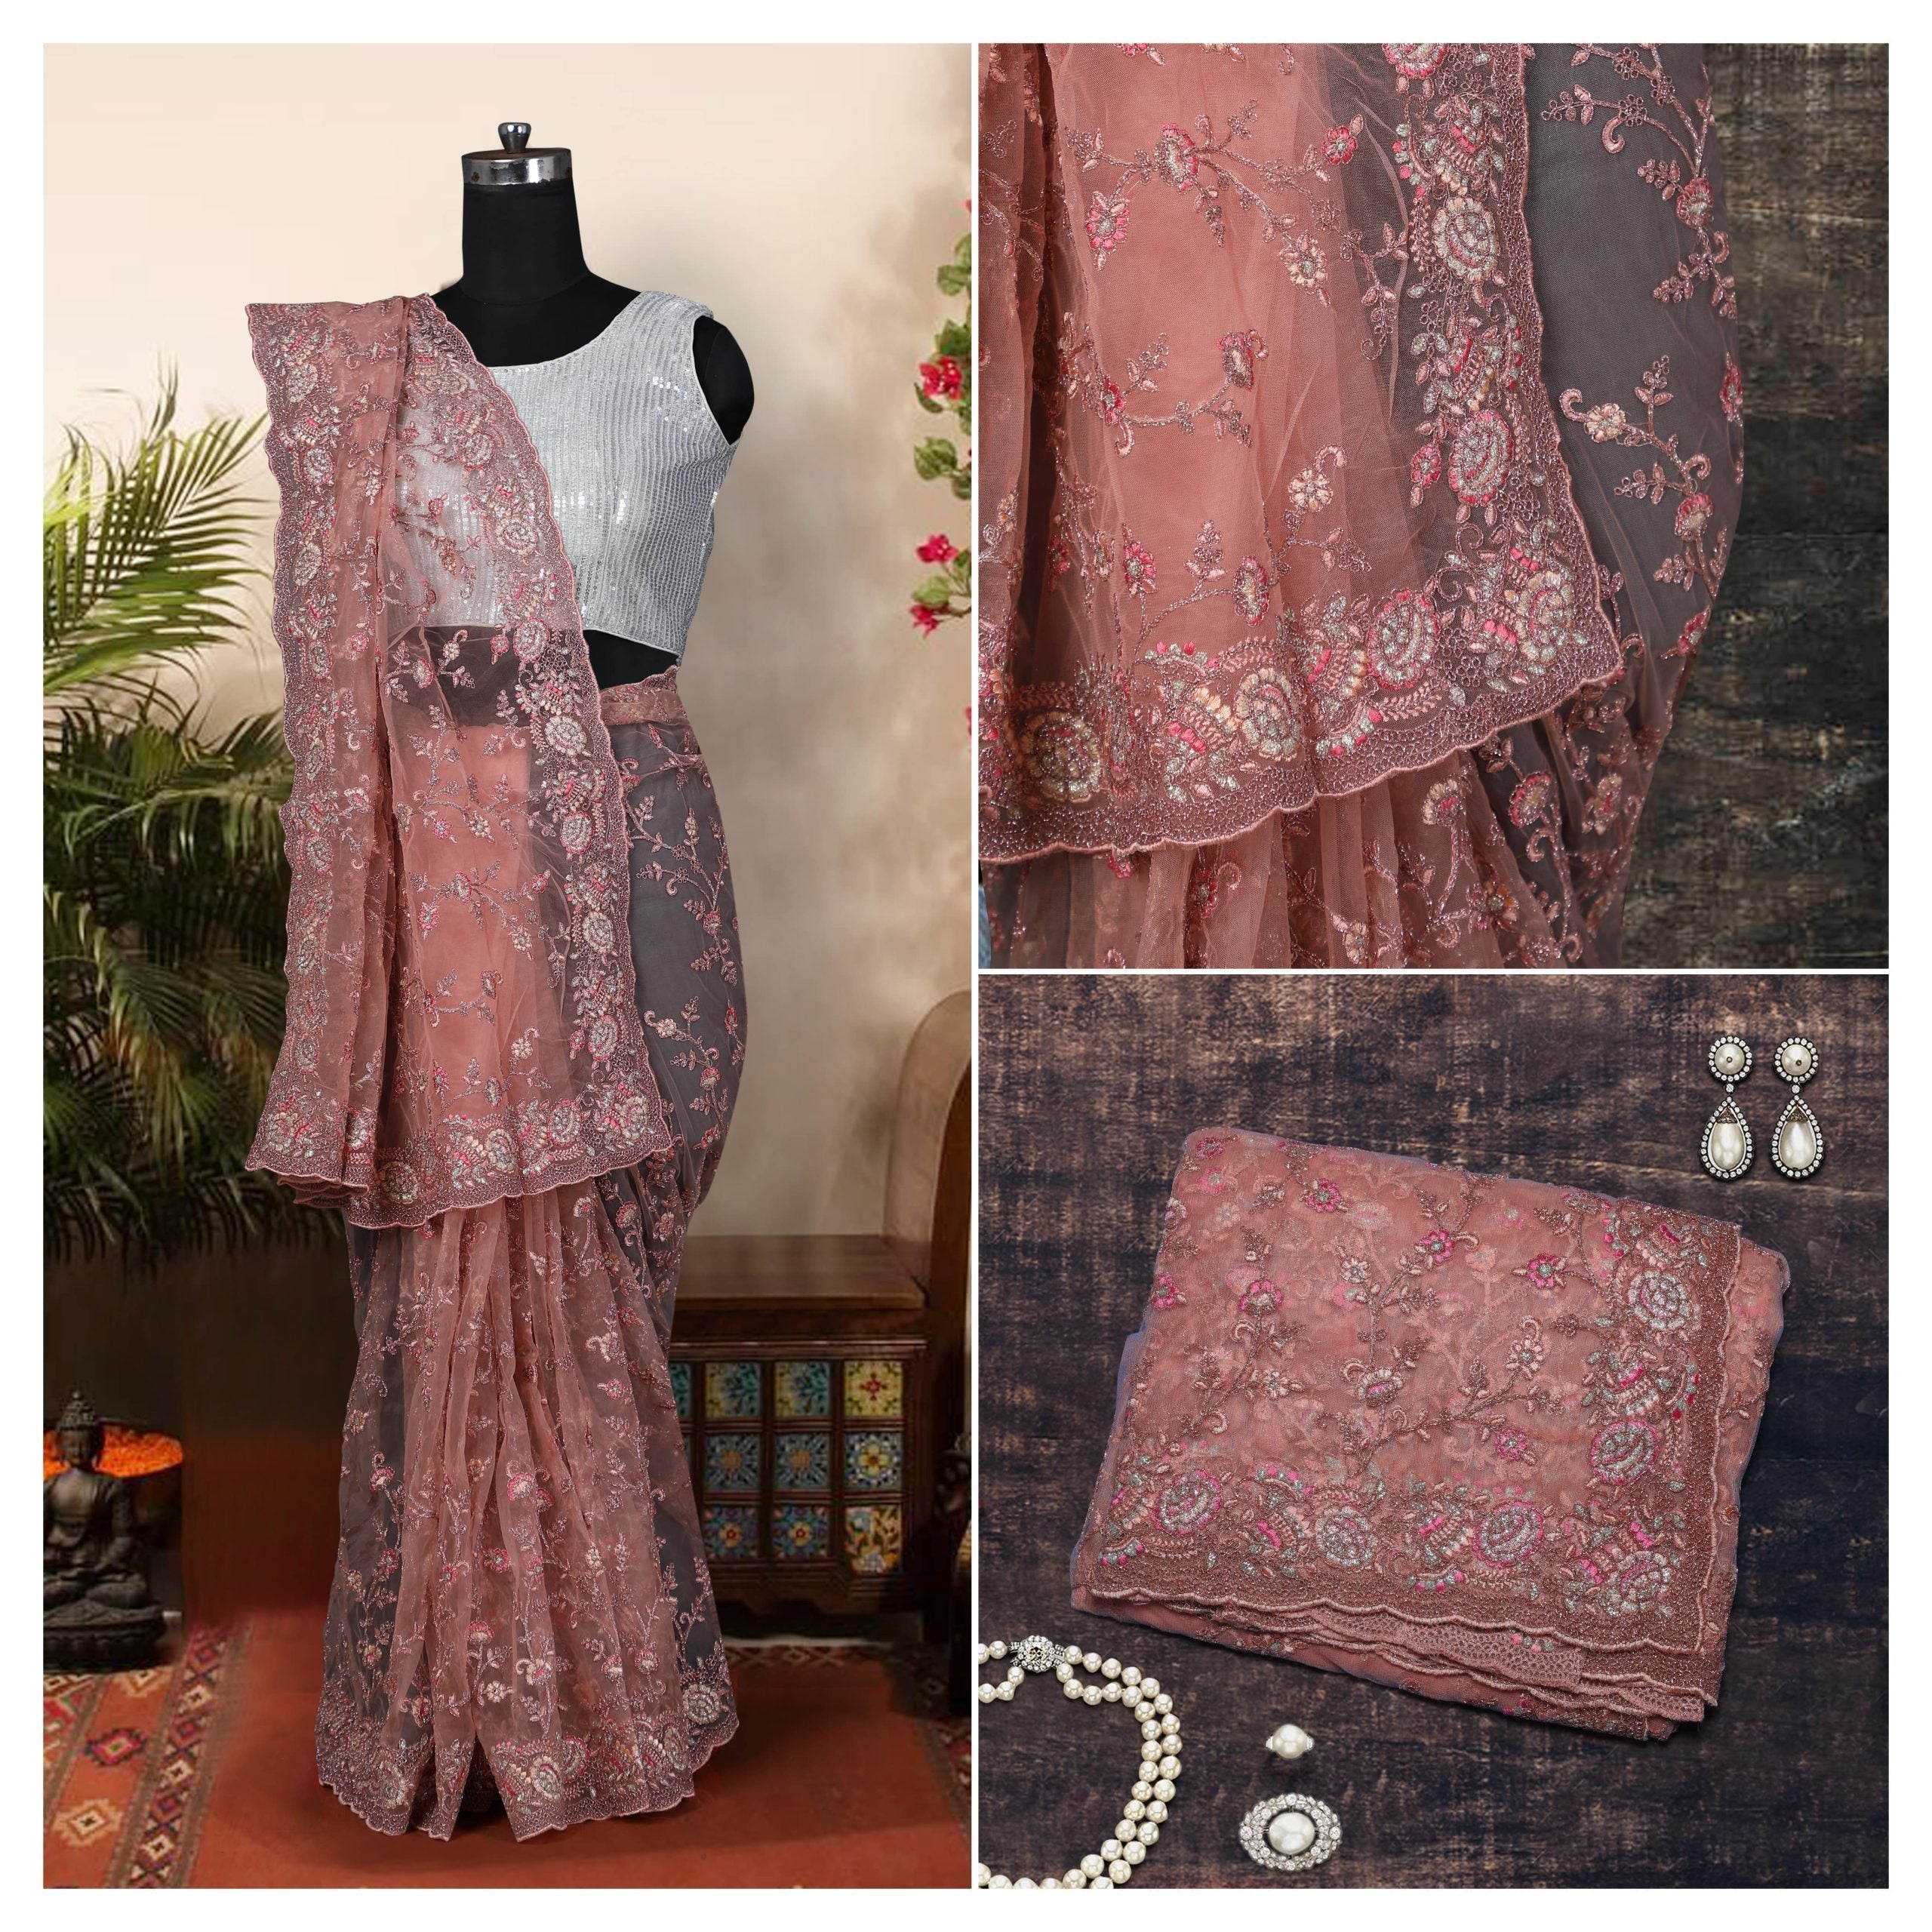 Embroidered Net Saree in Dusty Peach Color - (Priya Light)